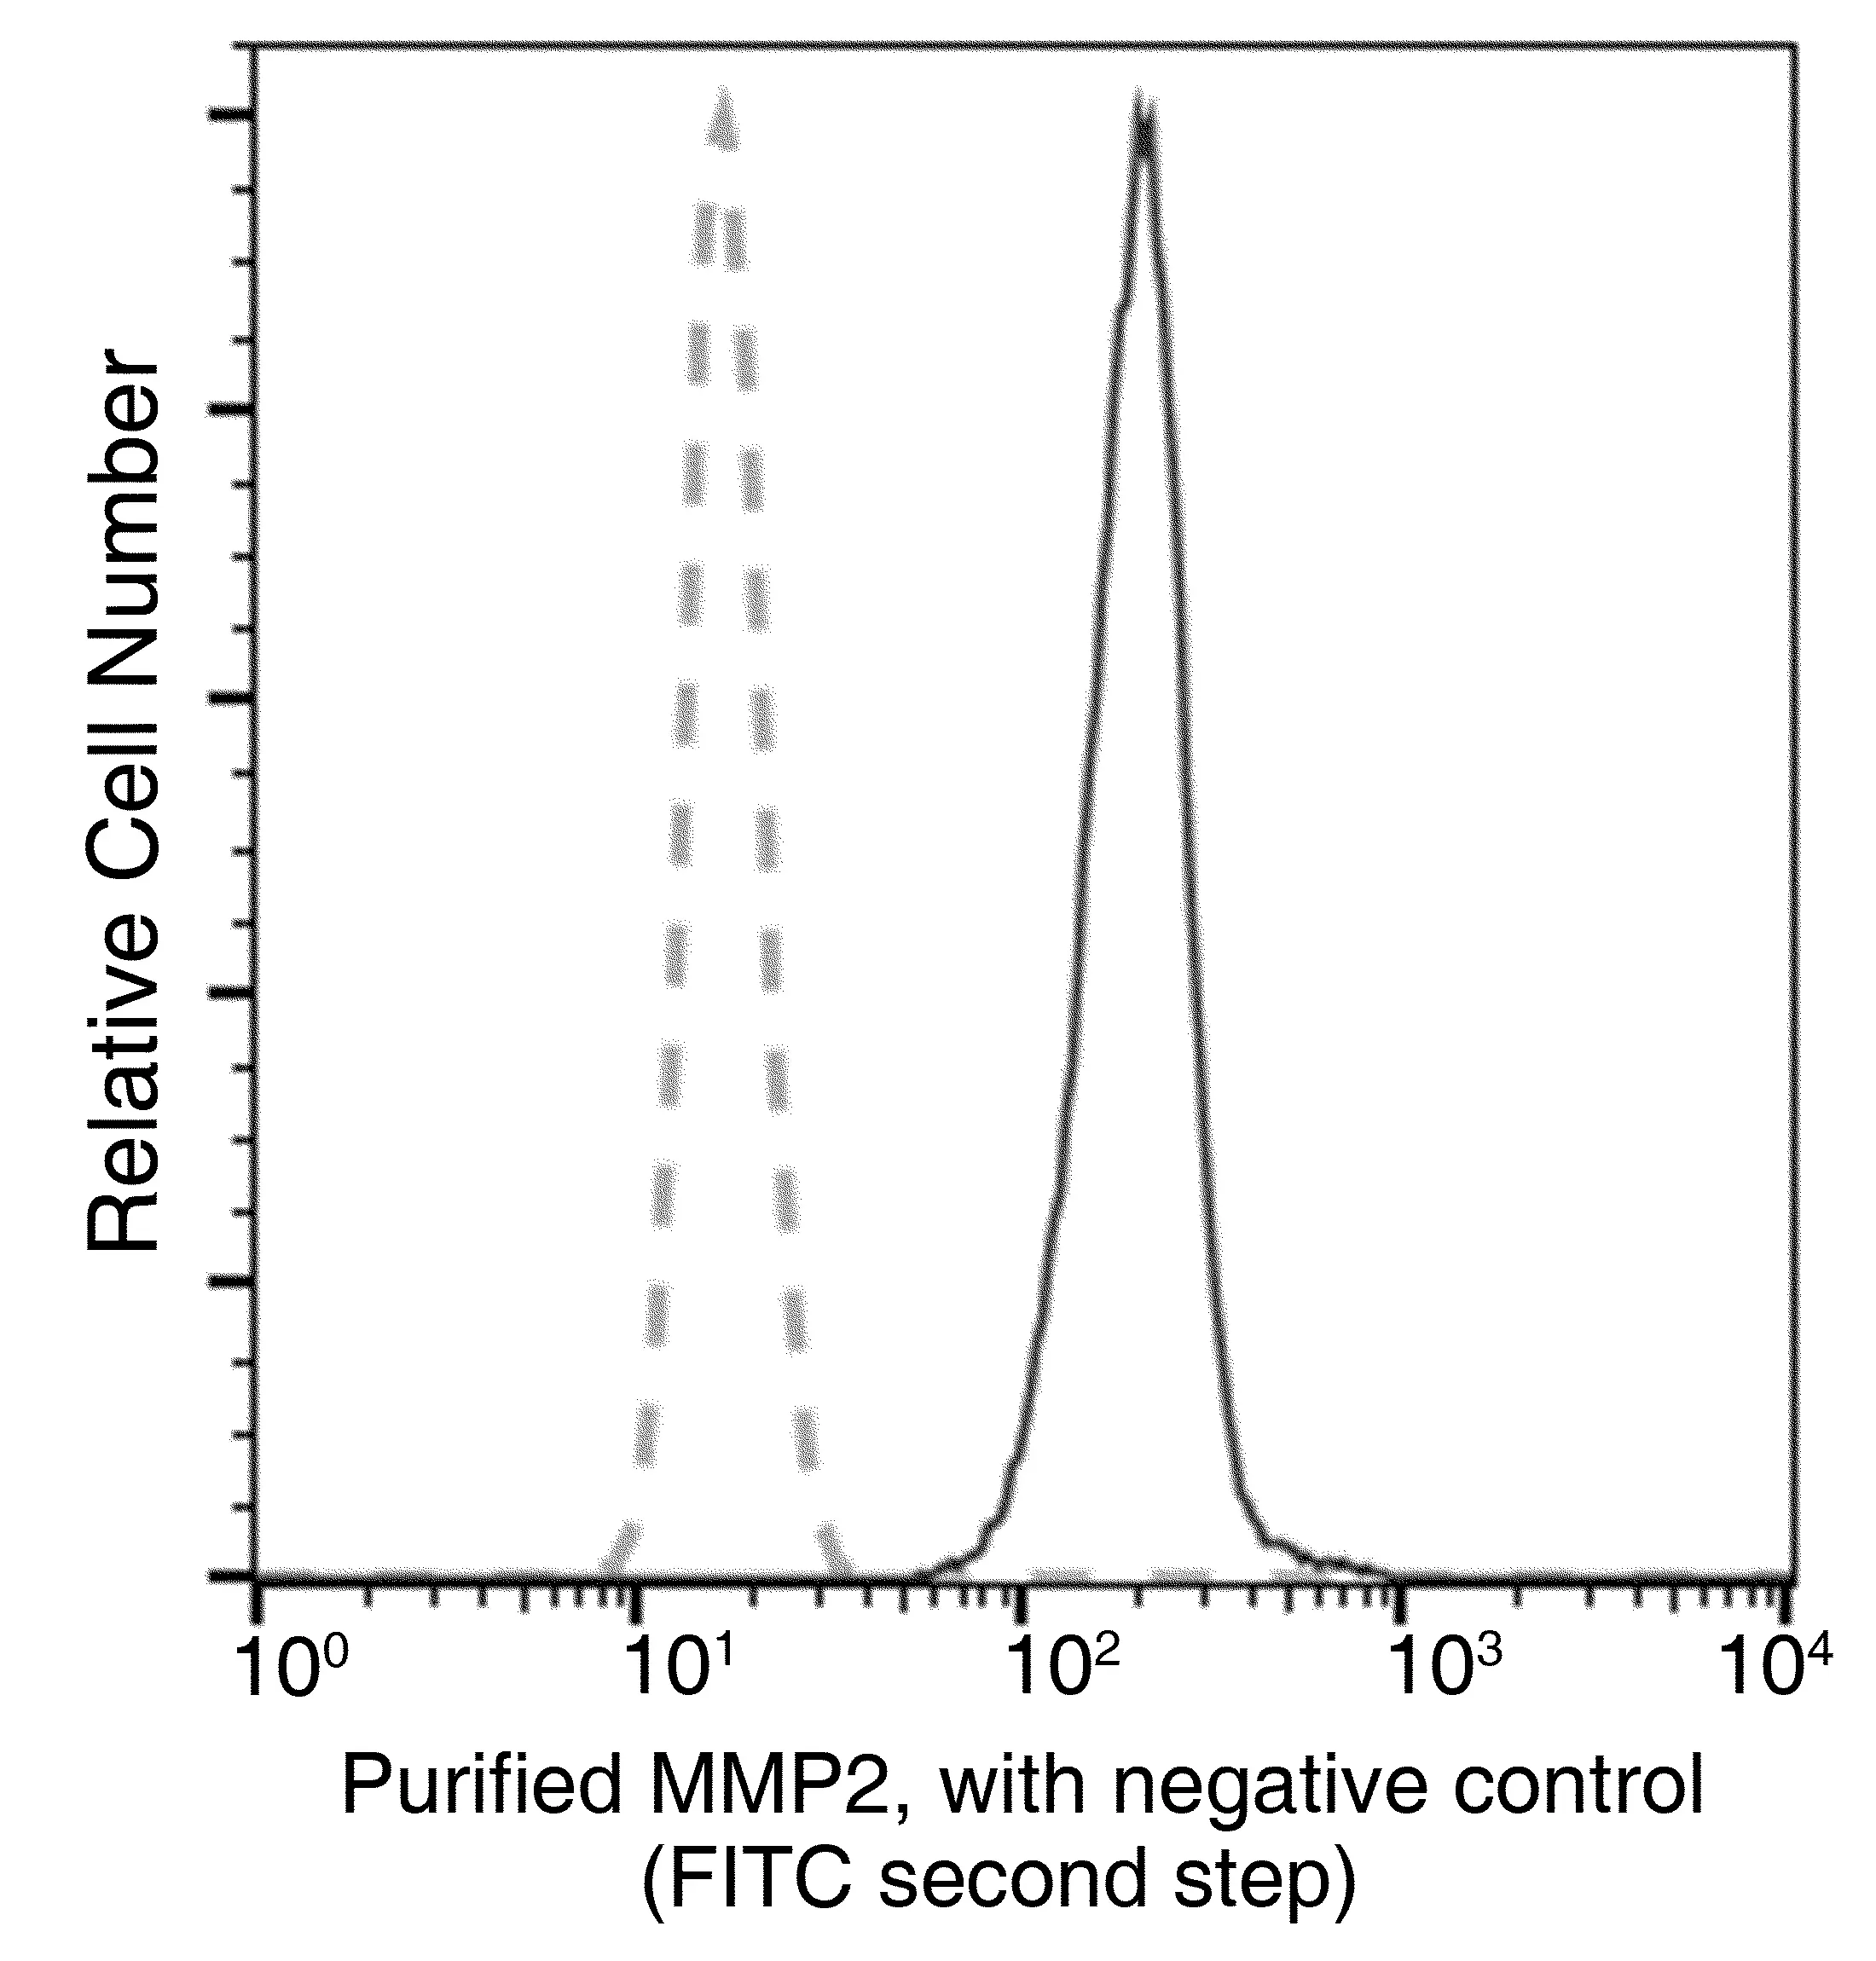 FACS analysis of MG-63 cells using GTX02066 MMP2 antibody [05].<br>The fluorescence histograms were derived from gated events with the forward and side light-scatter characteristics of intact cells.